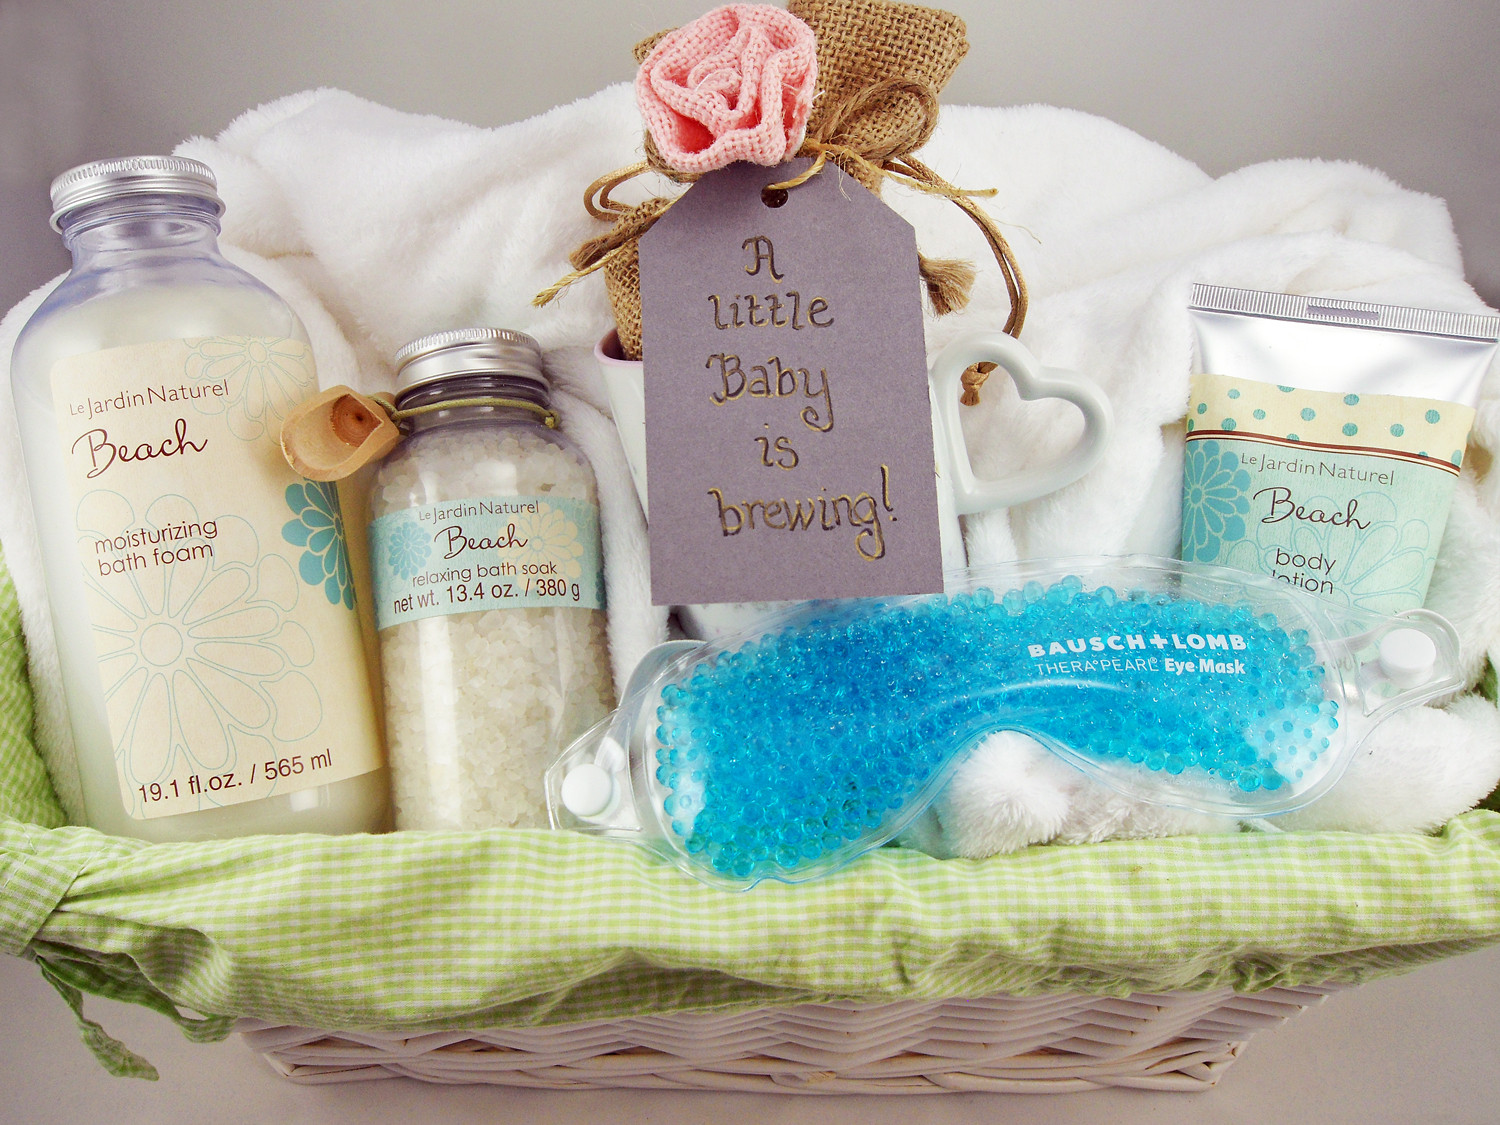 Coolest Baby Gifts 2015
 Expecting Couples Love These Unique Personalized Baby Gifts